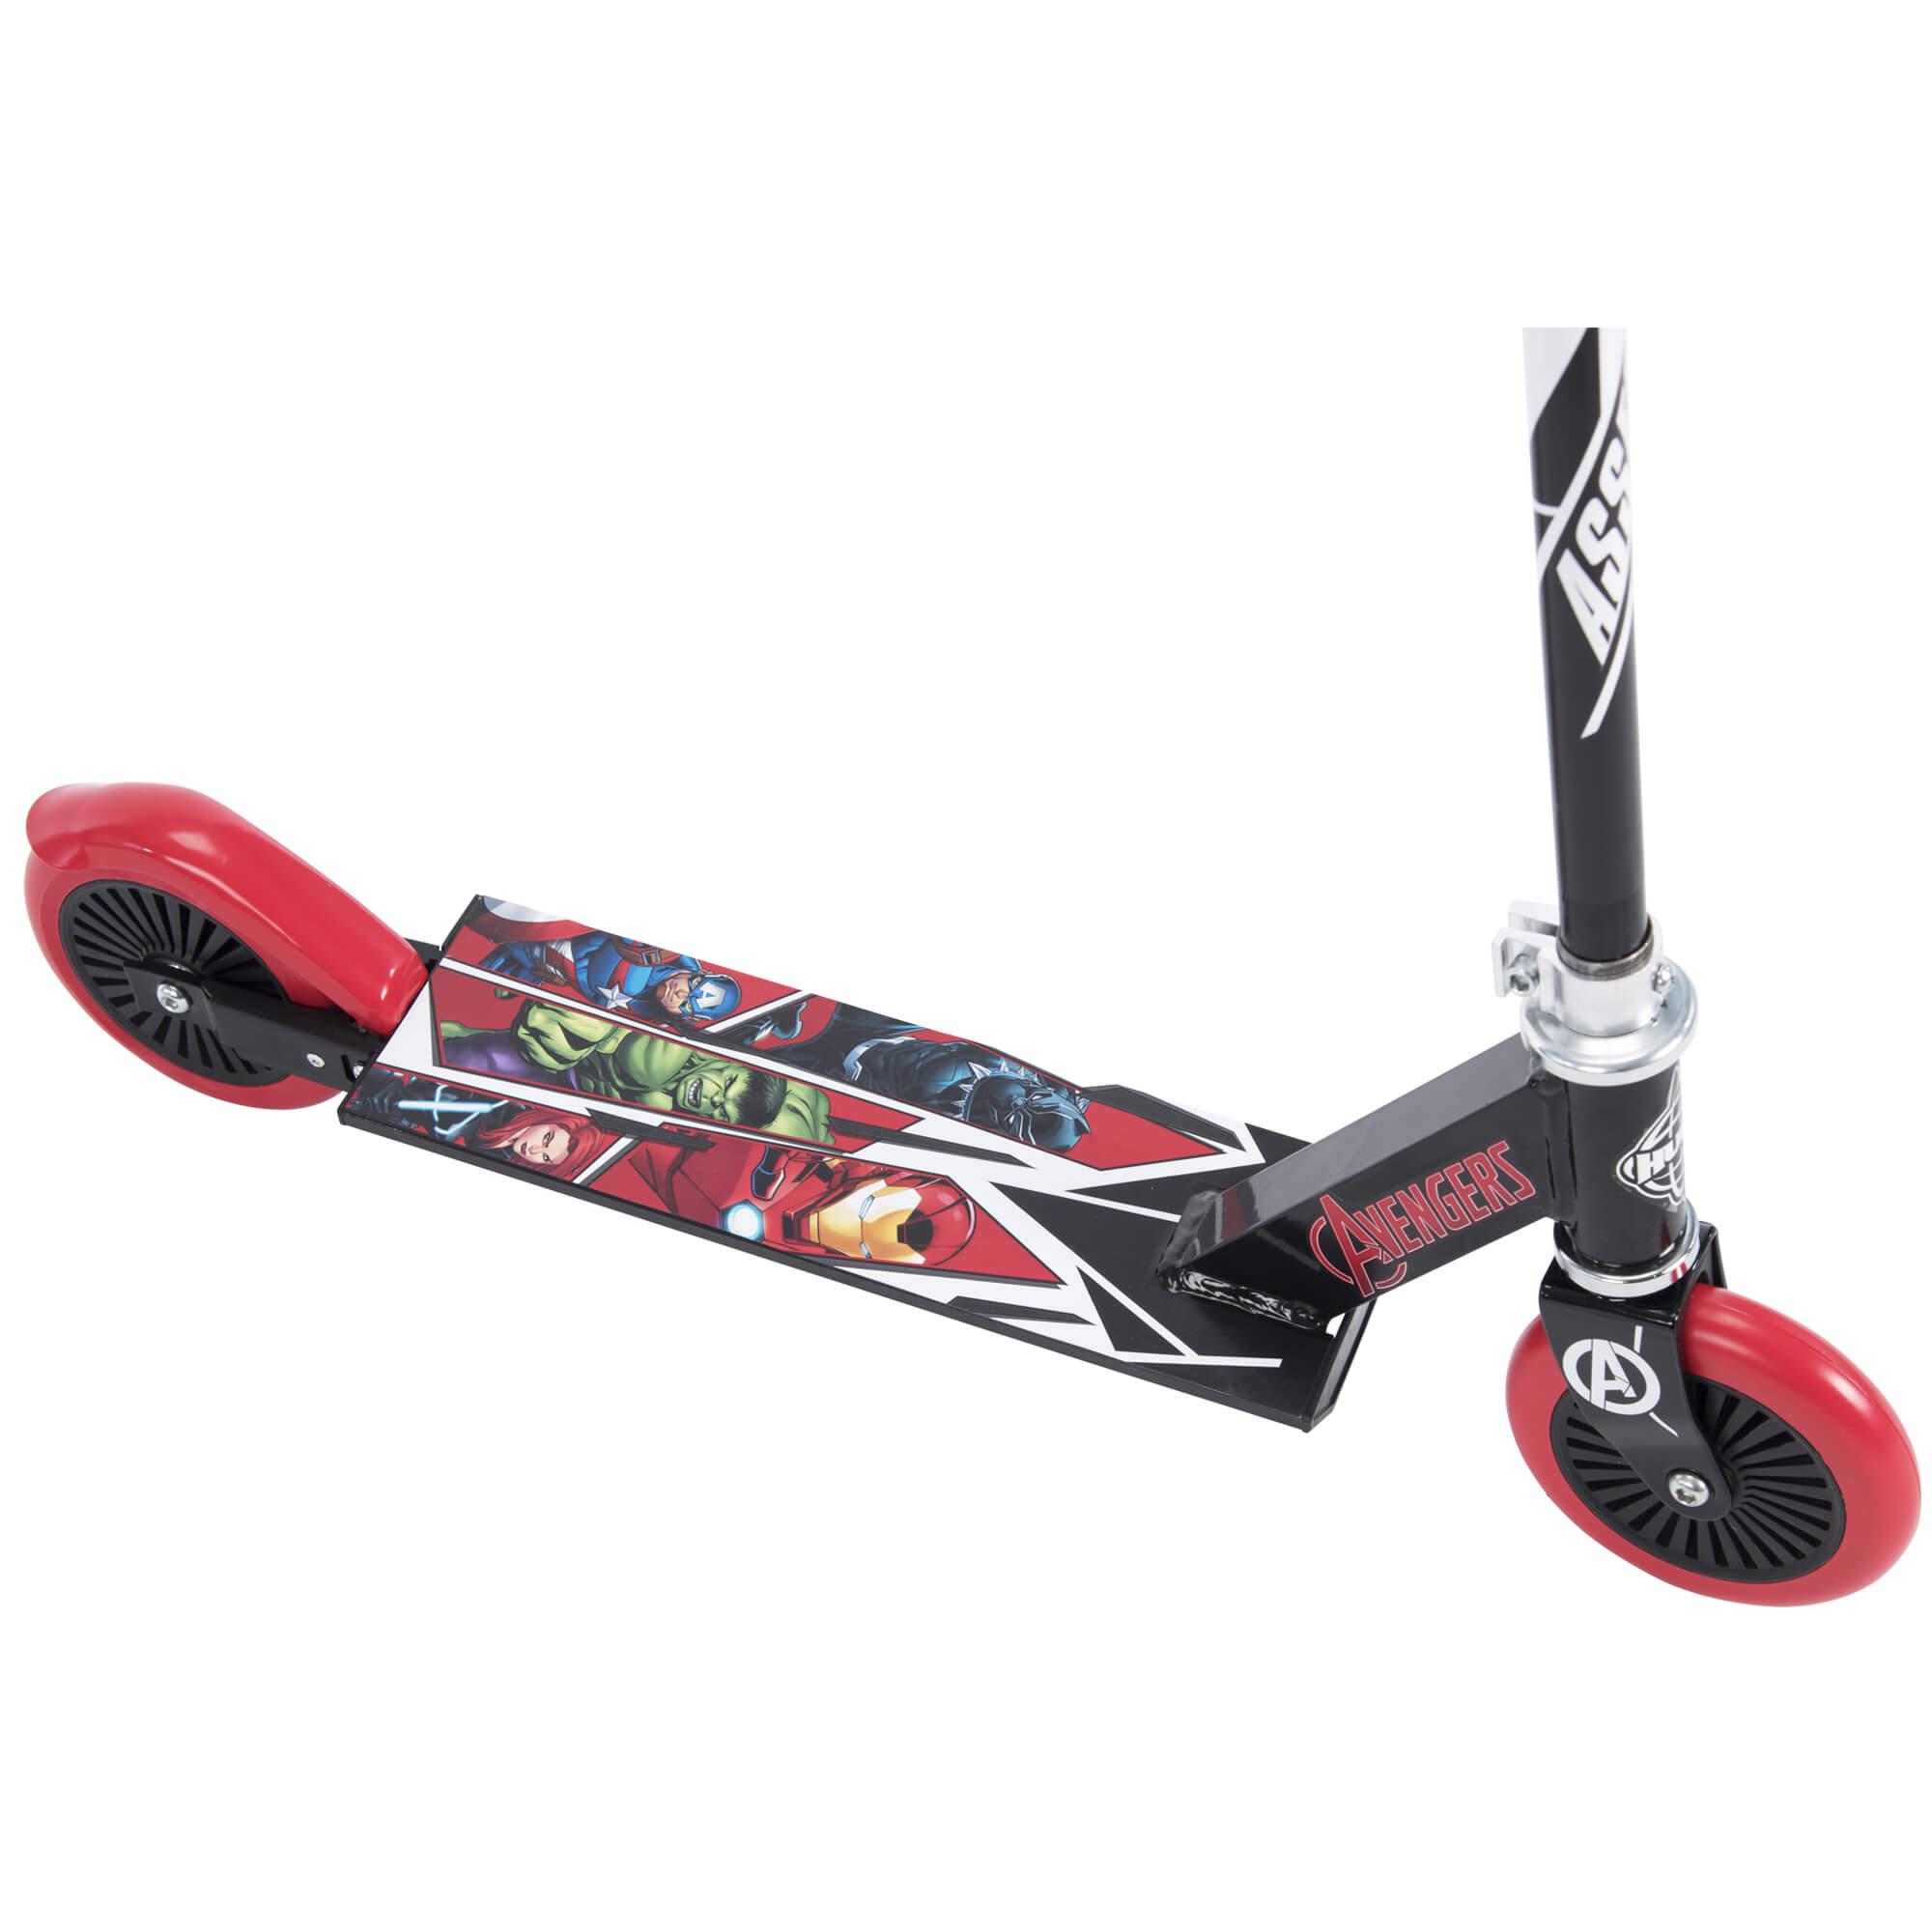 Marvel avengers Inline Folding Kick Scooter for Kids by Huffy - image 2 of 5